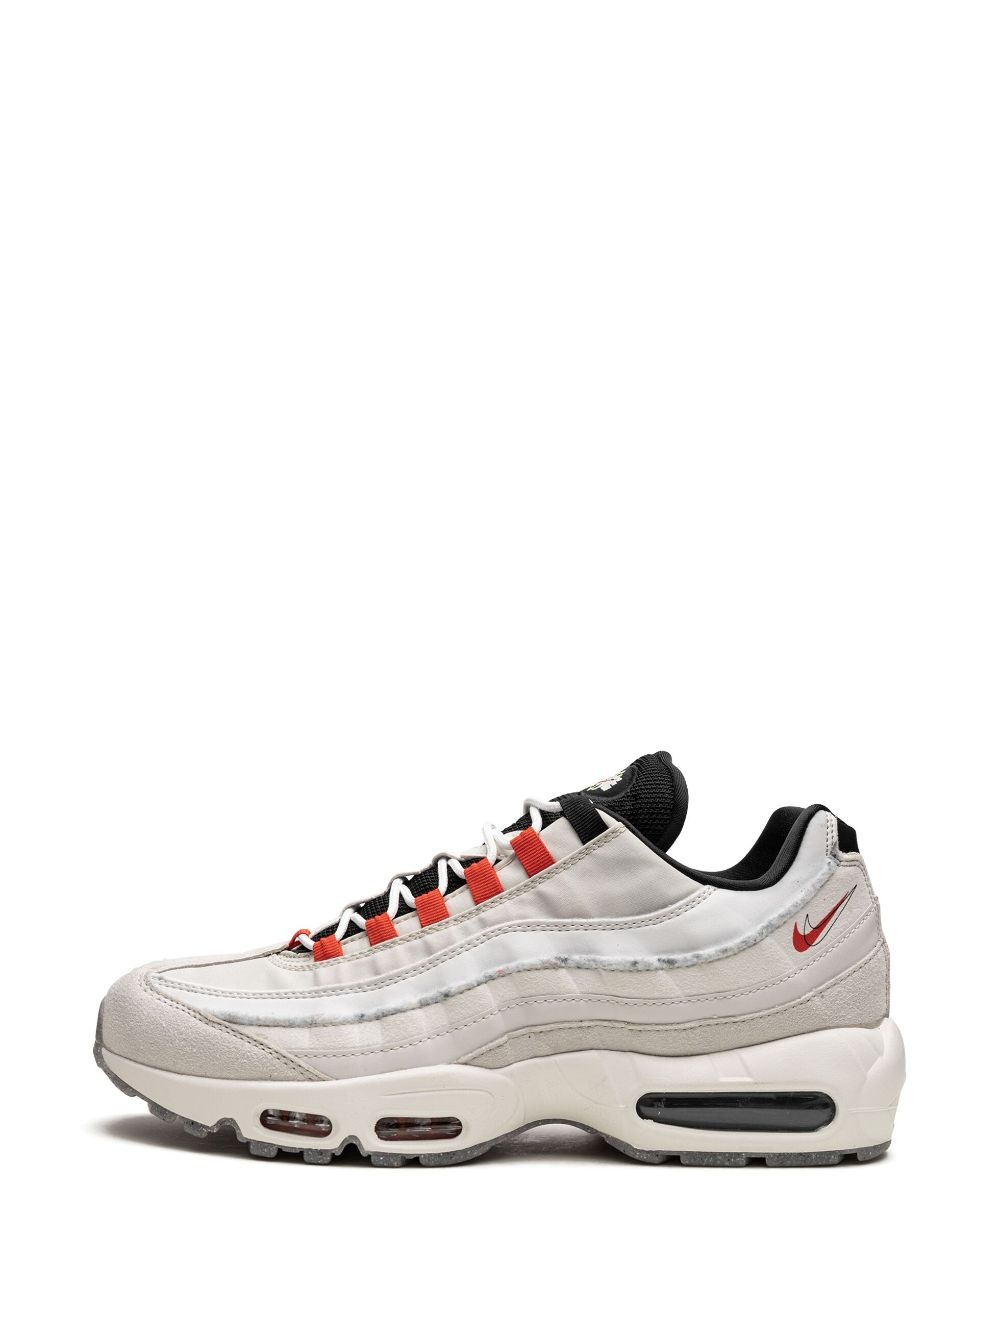 Air Max 95 SE "Double Swoosh" sneakers - 5